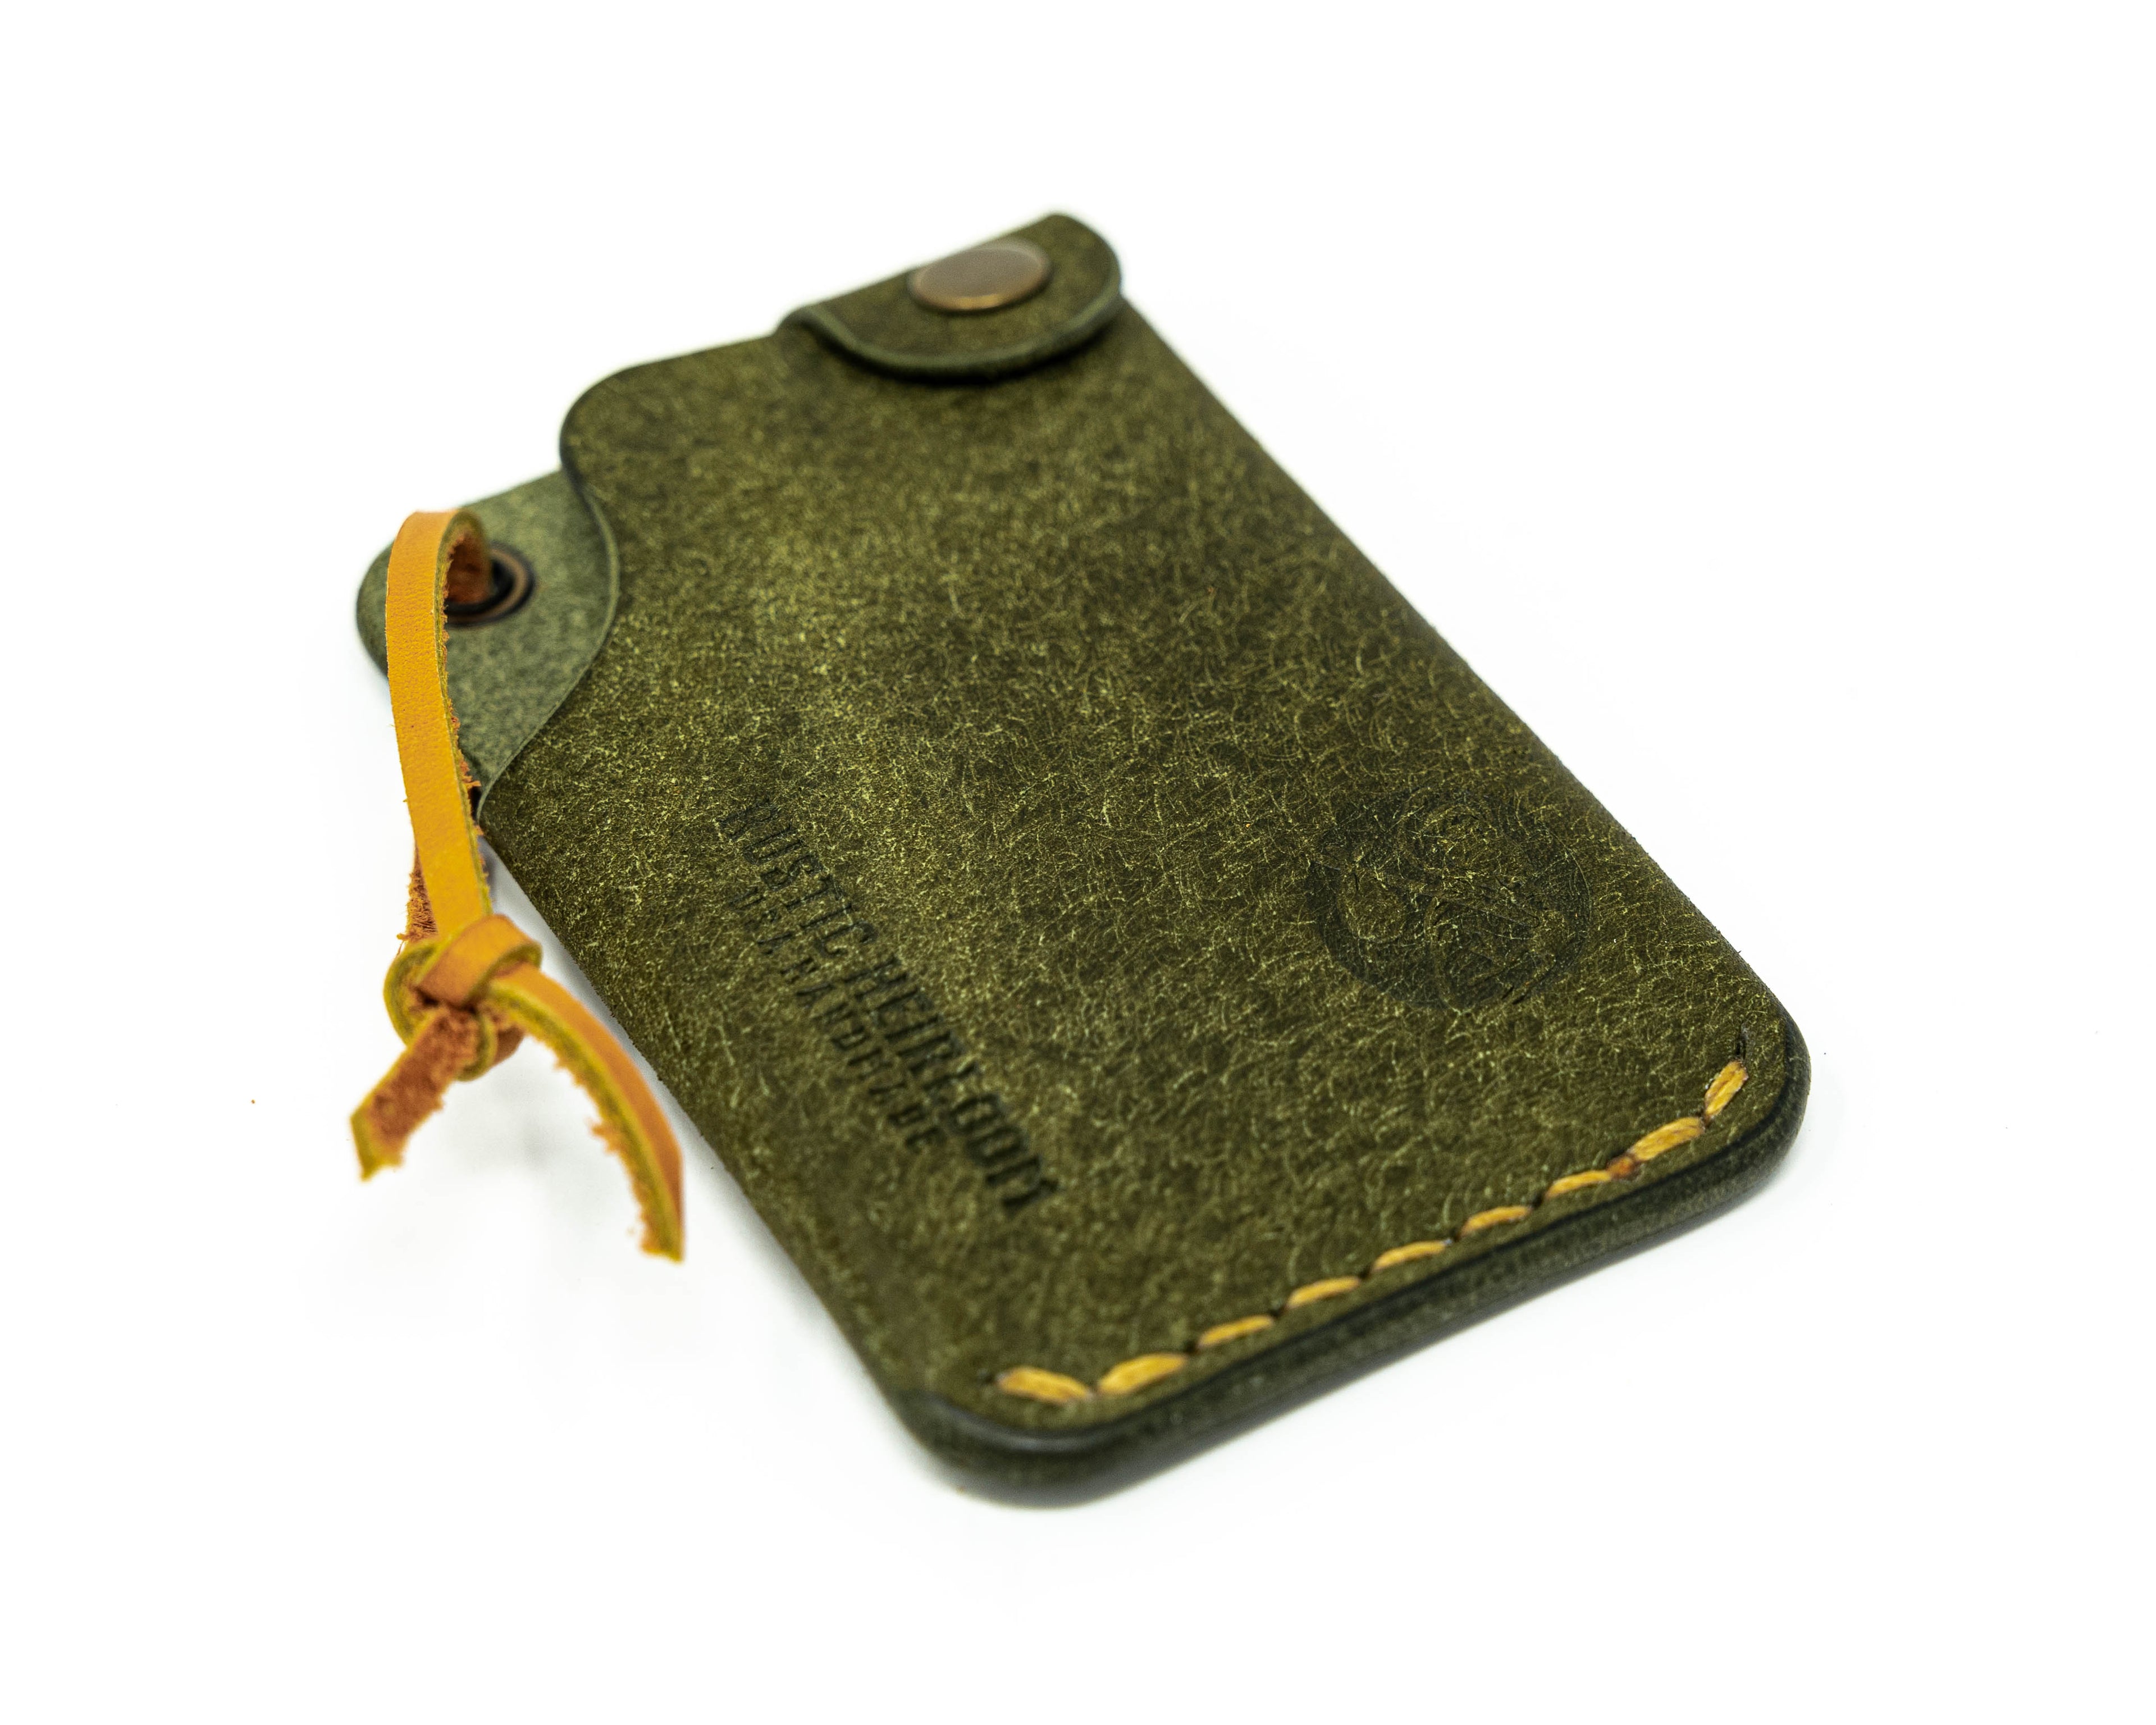 Top view of olive hitchhiker wallet slanted to the left on white background.